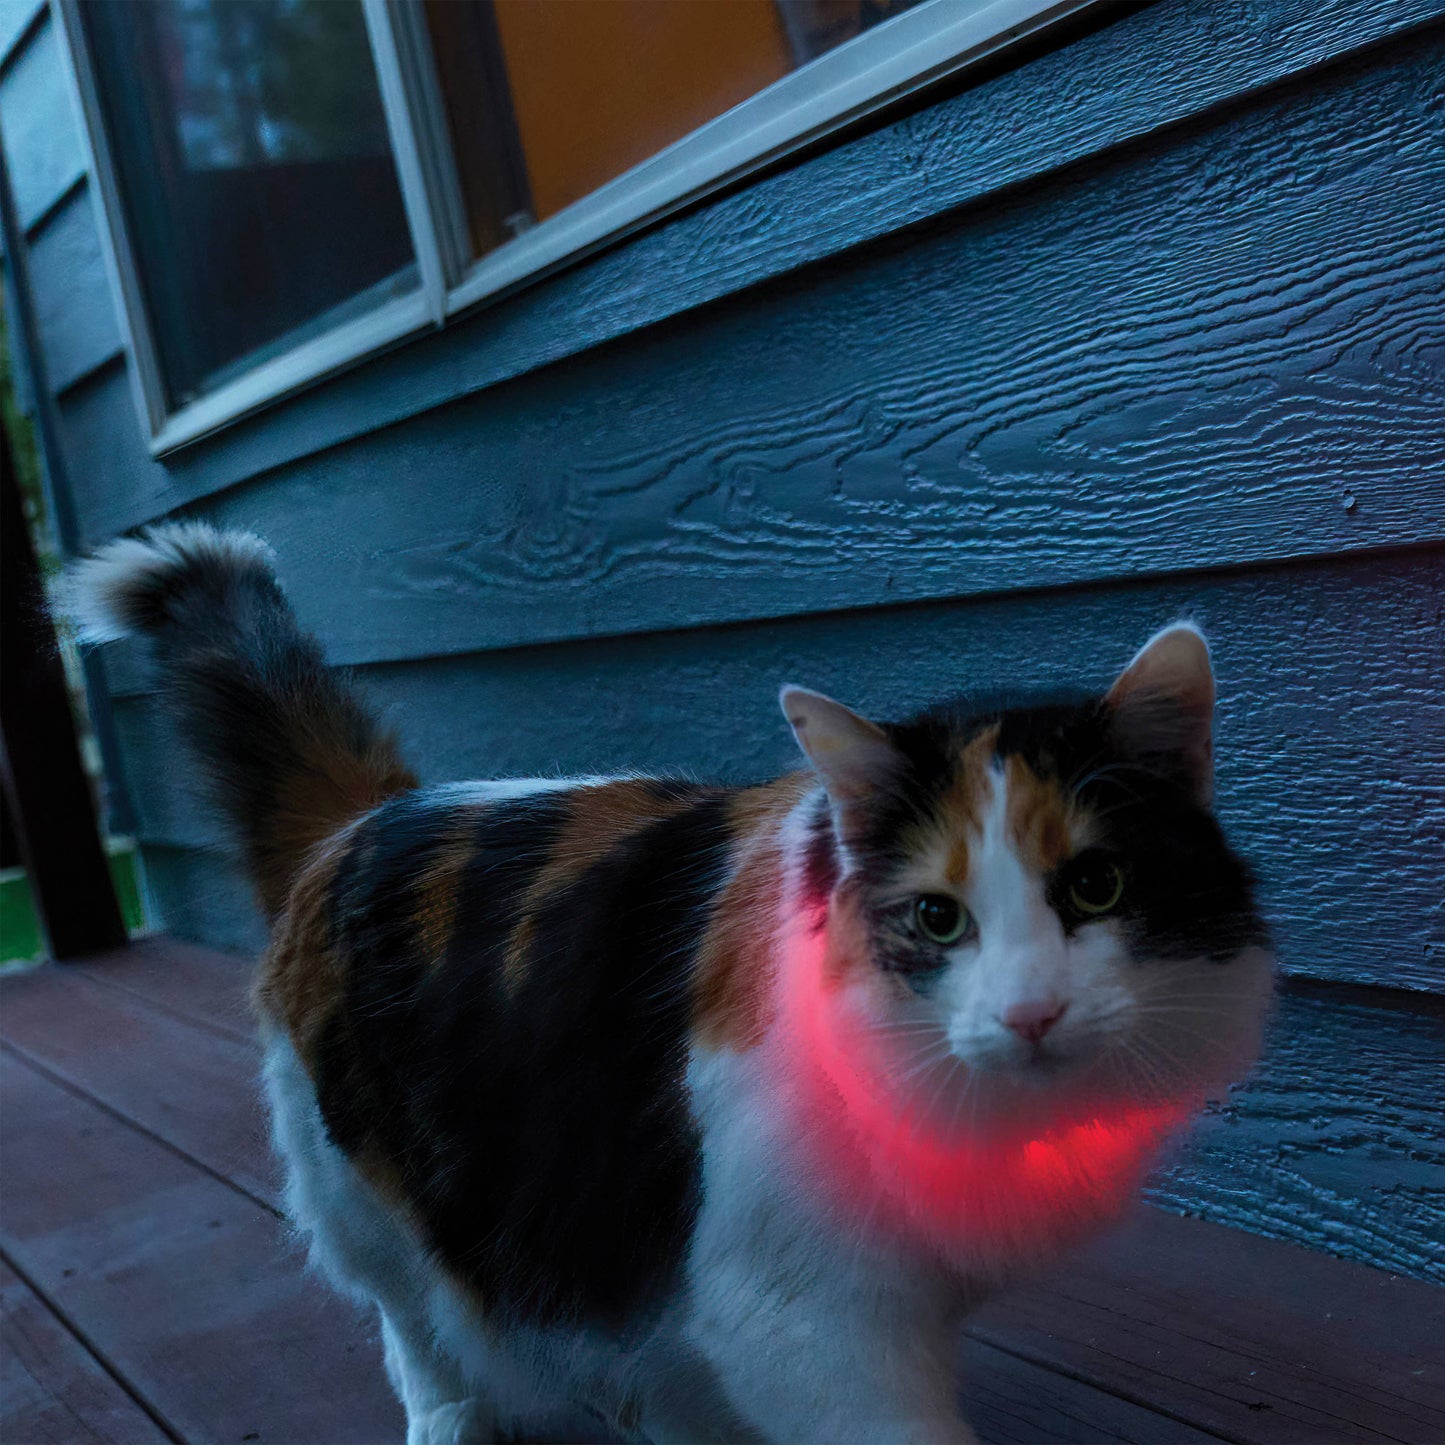 Nite Ize NiteMeow Rechargeable LED Safety Necklace Disc-O